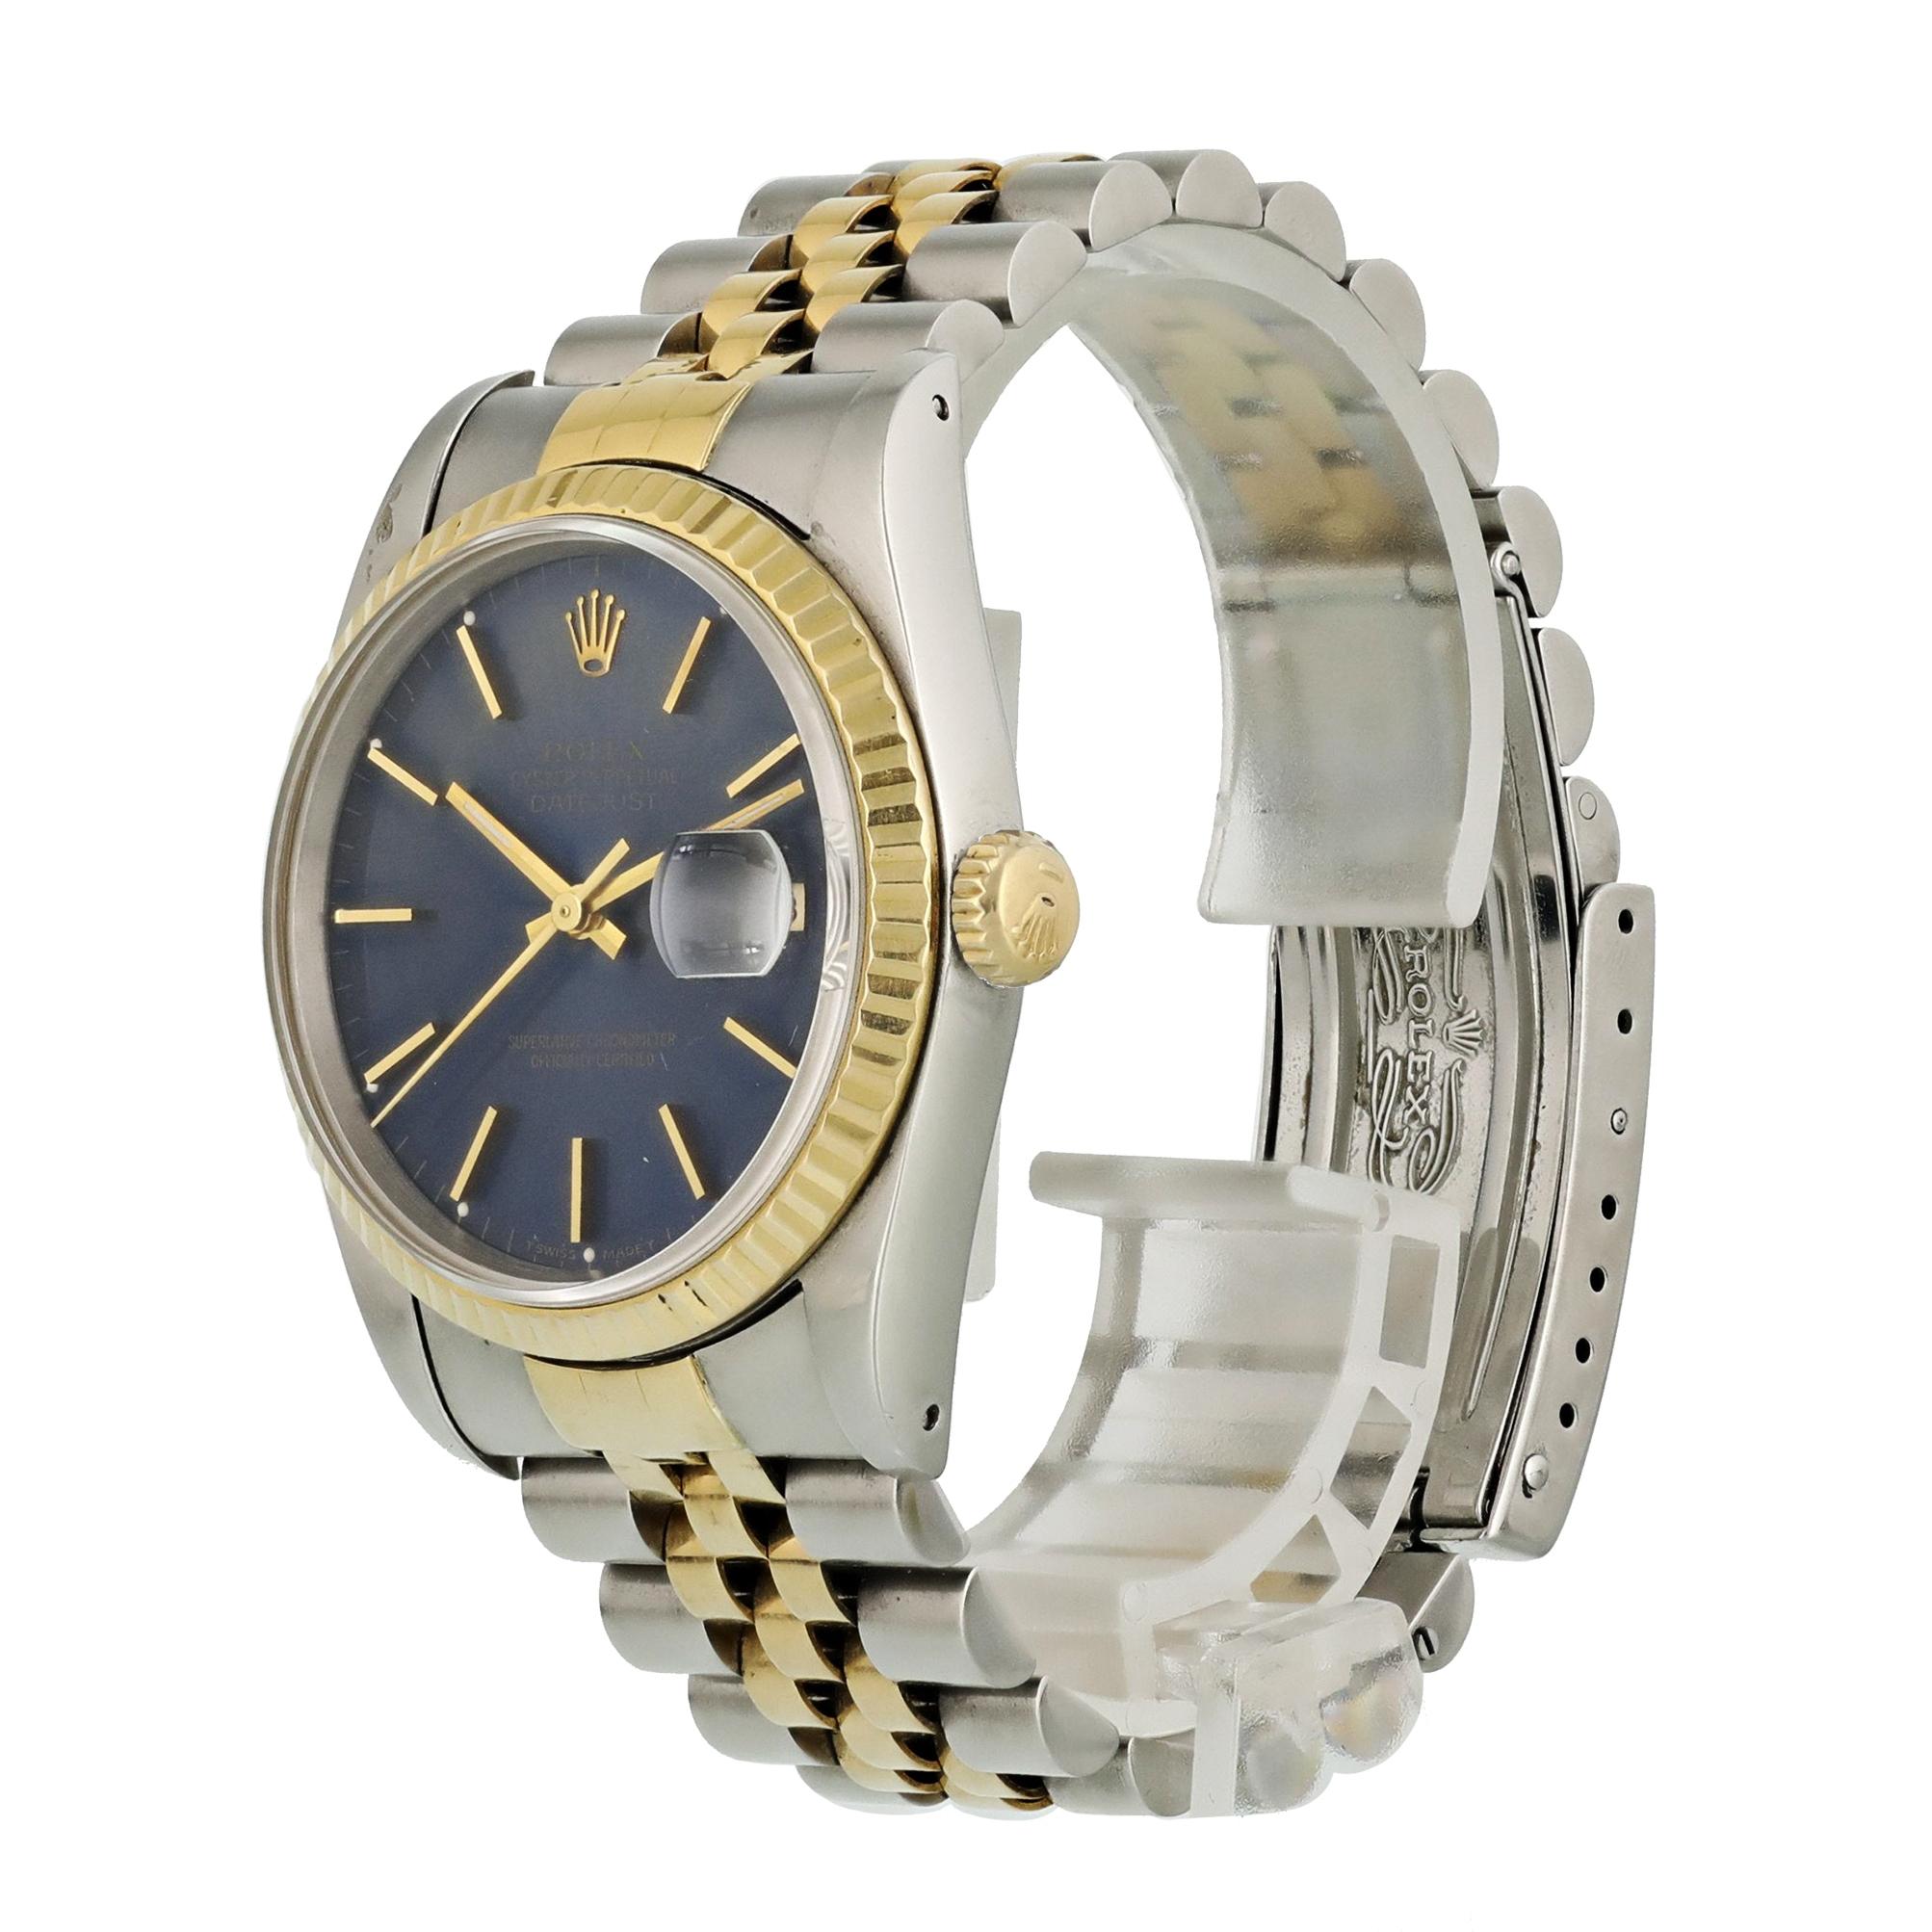 Rolex Datejust 16233 Men's Watch
36mm Stainless Steel case. 
Yellow Gold Stationary bezel. 
Blue dial with luminous gold hands and index hour markers. 
Minute markers on the outer dial. 
Date display at the 3 o'clock position. 
Stainless Steel